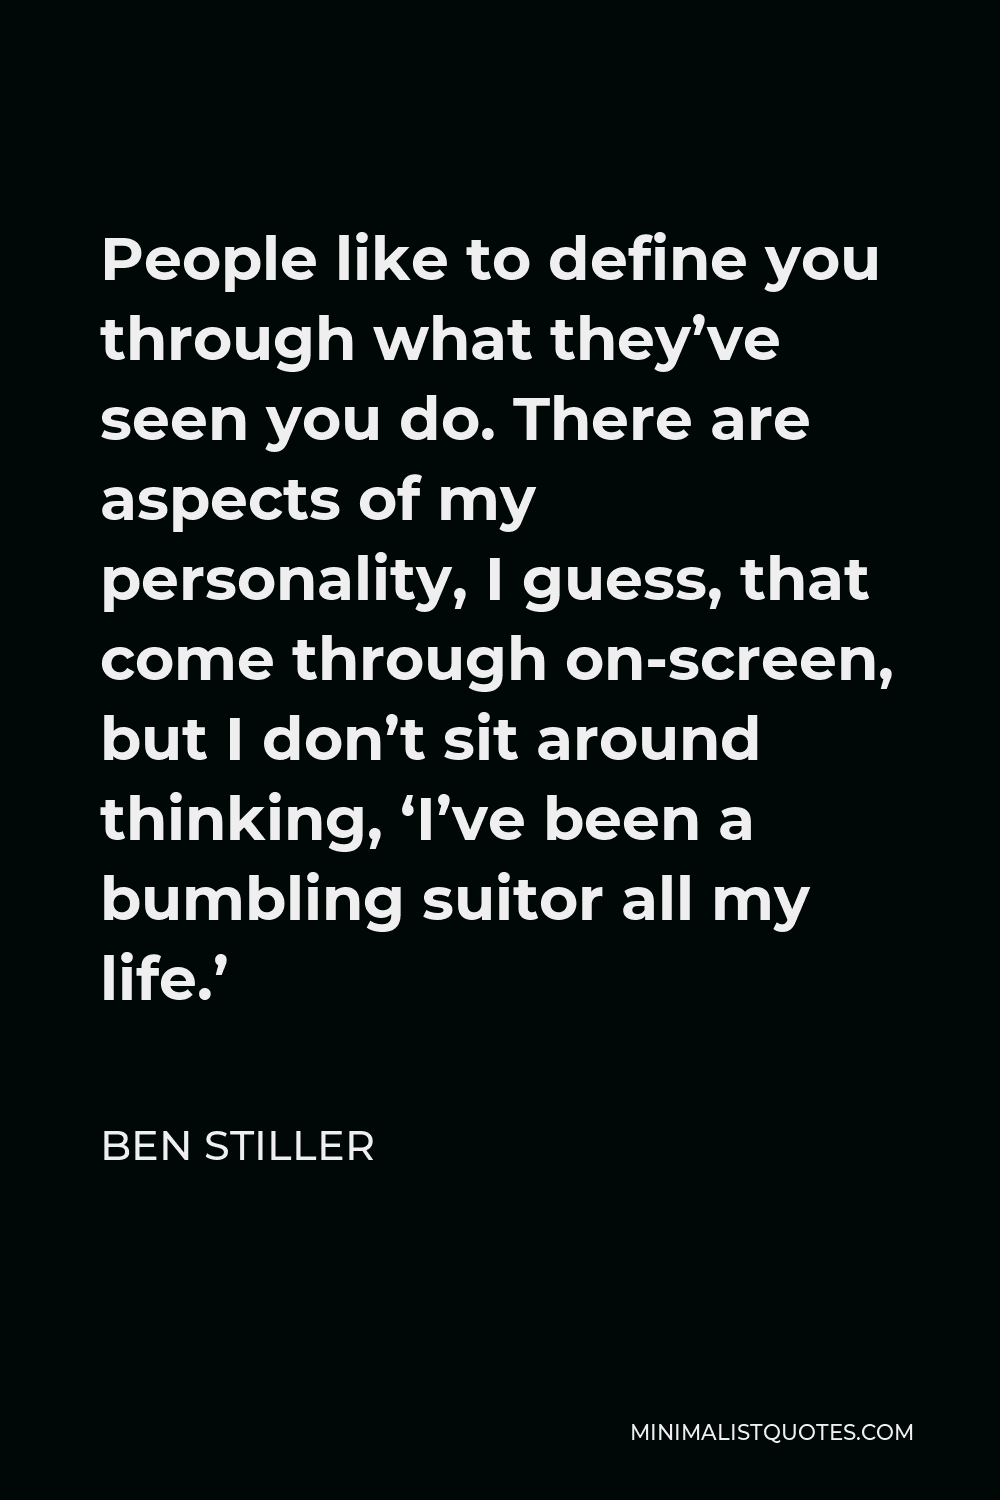 Ben Stiller Quote - People like to define you through what they’ve seen you do. There are aspects of my personality, I guess, that come through on-screen, but I don’t sit around thinking, ‘I’ve been a bumbling suitor all my life.’